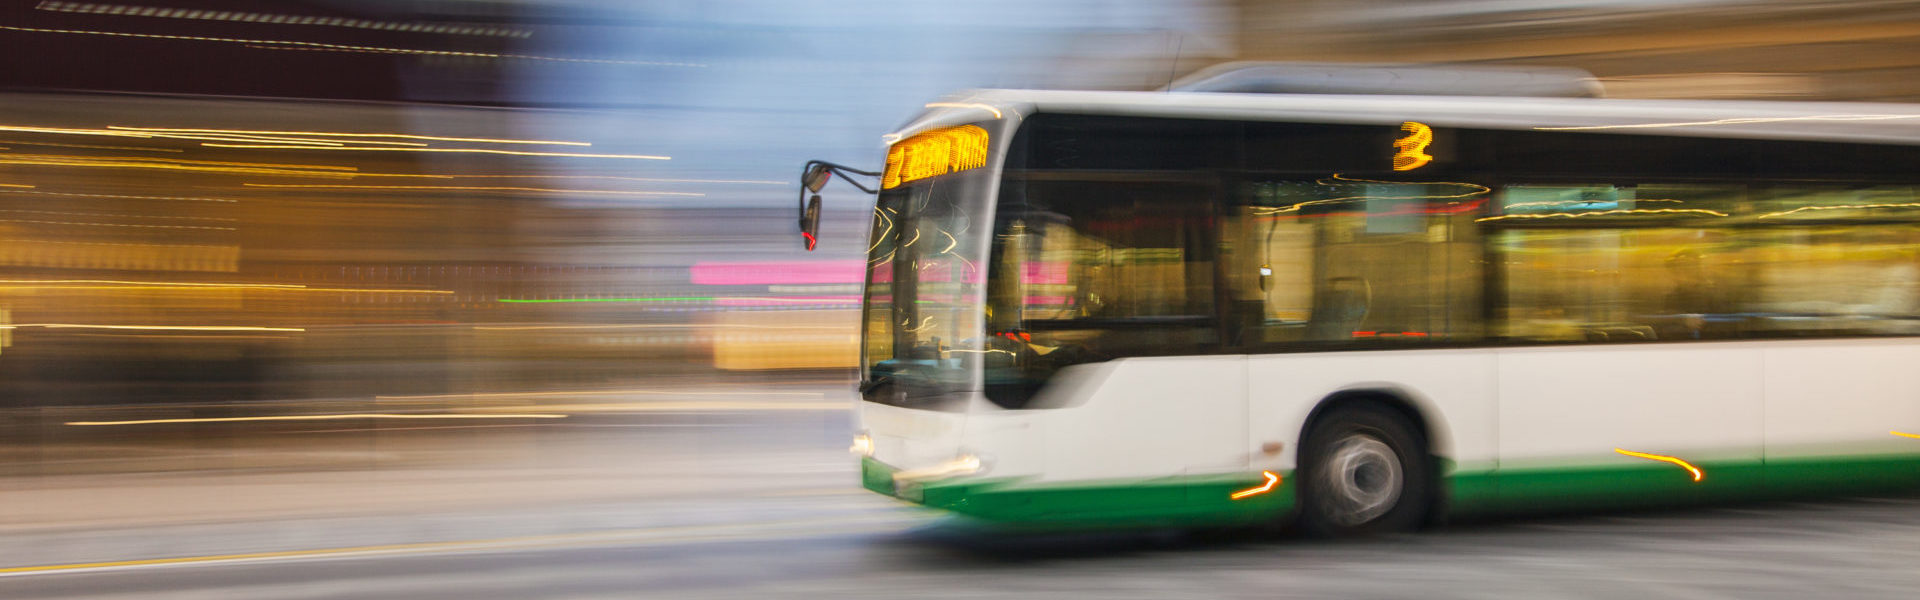 Public transportation insurance bus header, city bus driving on a city street with a motion blur background.